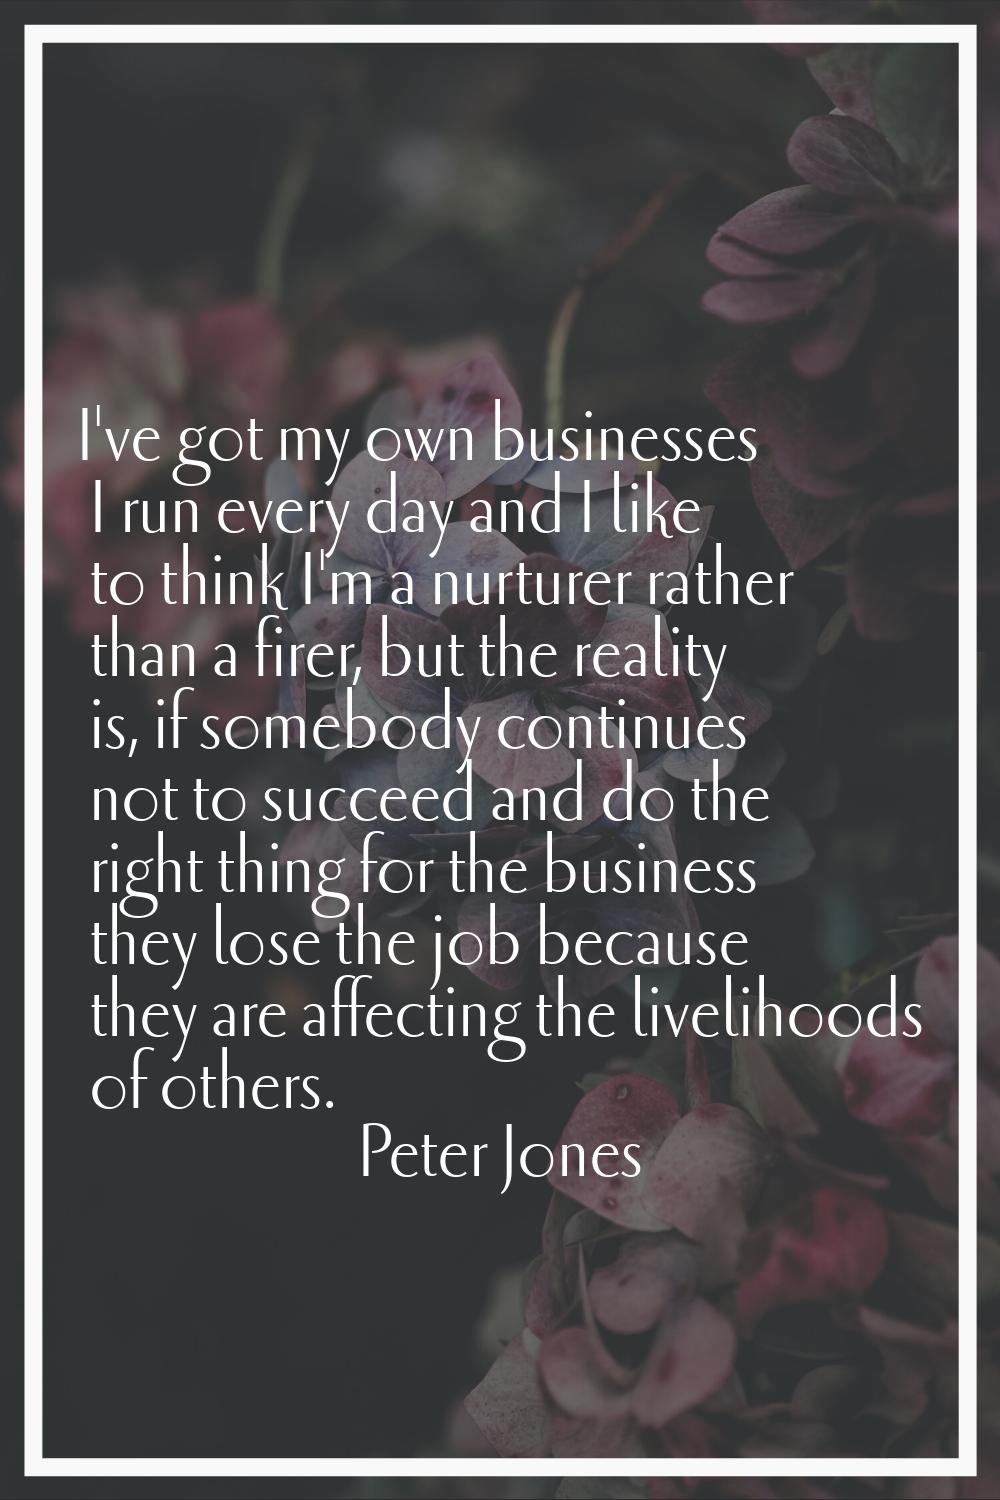 I've got my own businesses I run every day and I like to think I'm a nurturer rather than a firer, 